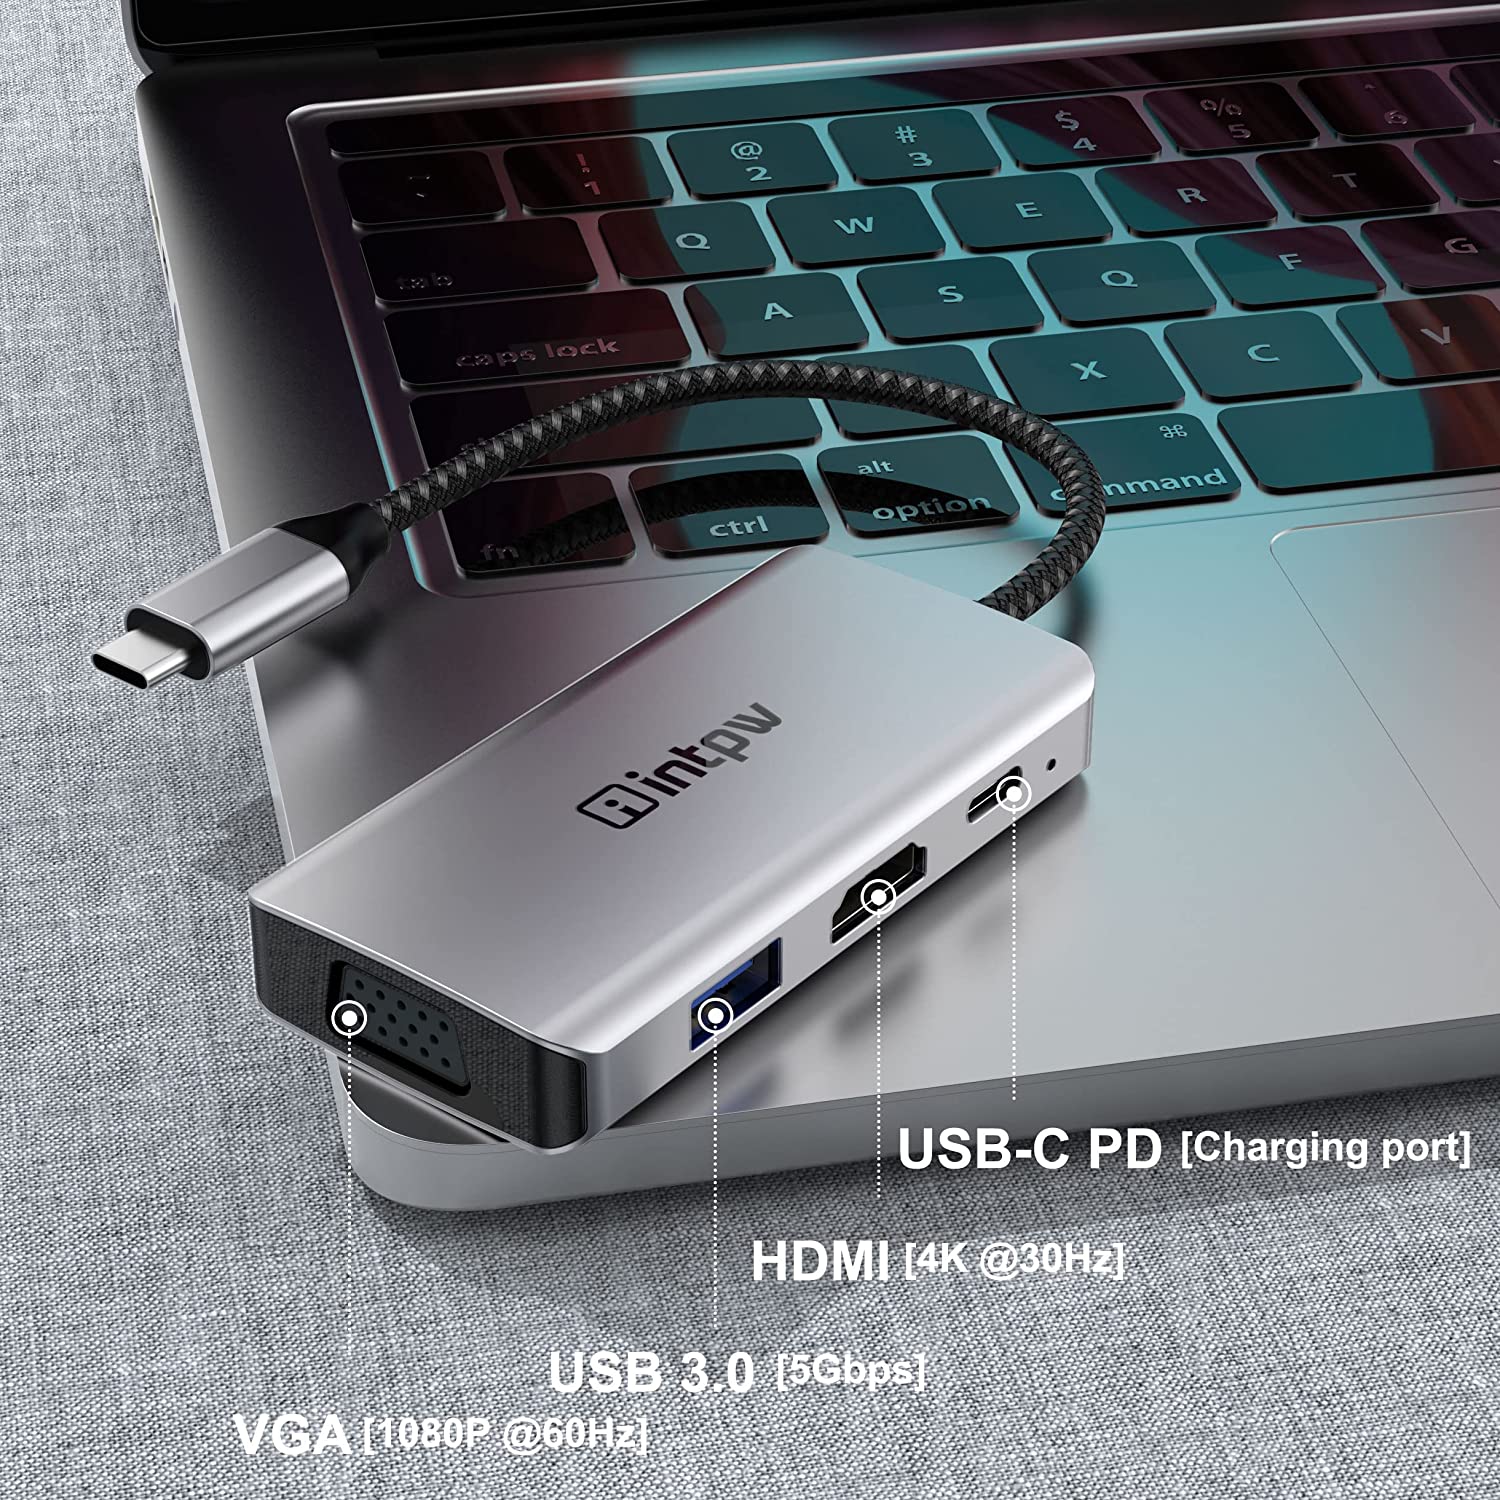 Xtreme Multi-Port USB Desktop Charger with 5 USB and 1 Type-C - Charge  Multiple Devices Simultaneously 